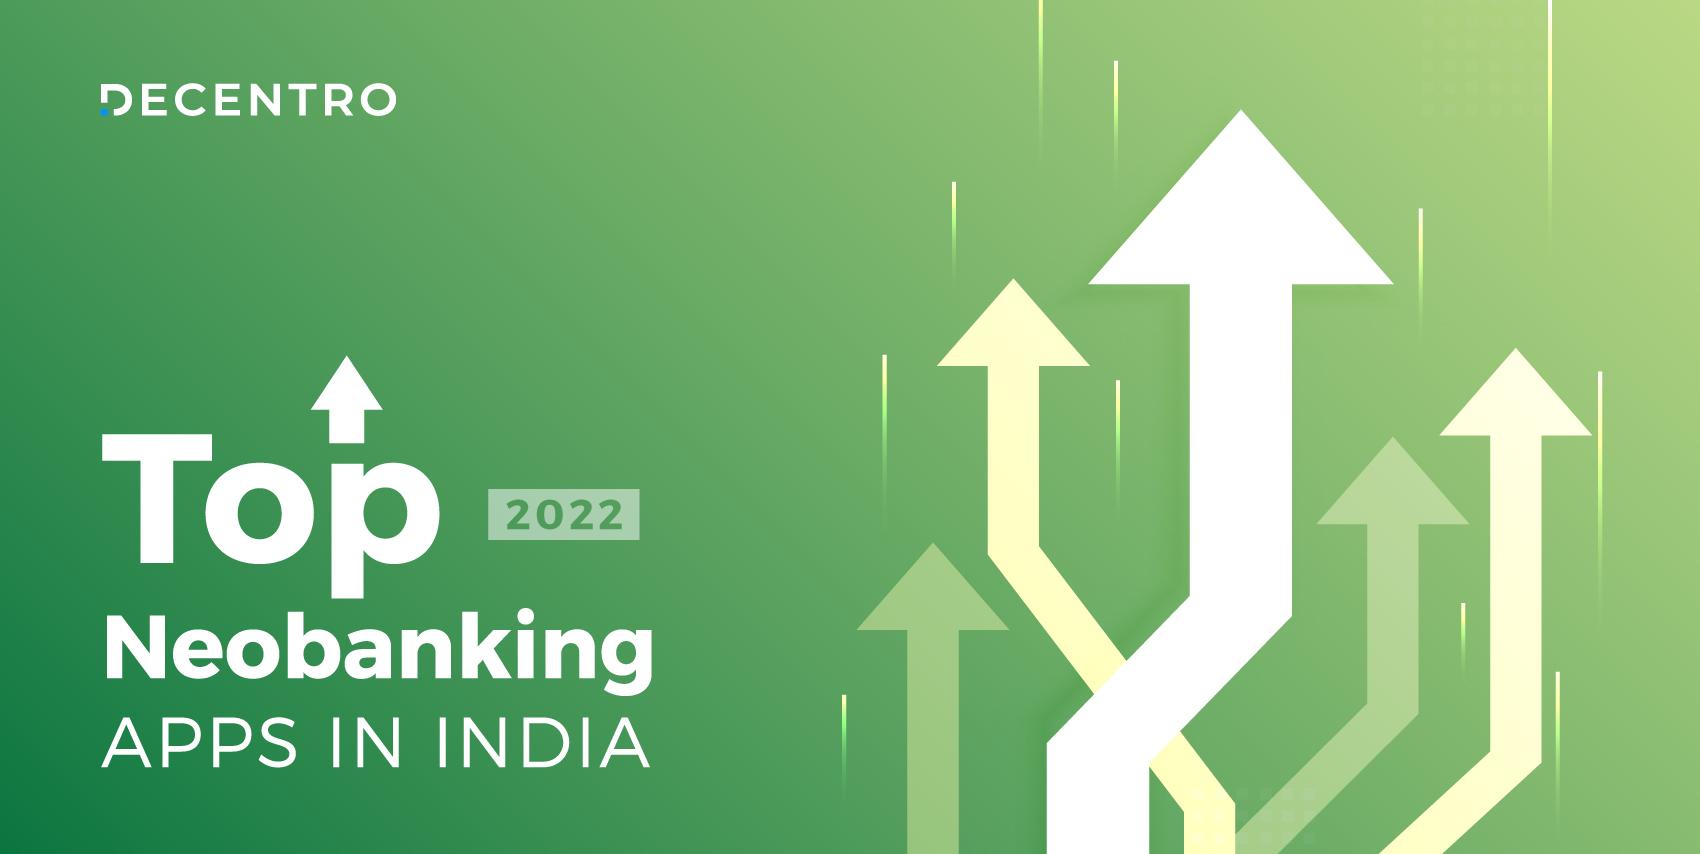 List of the best neobanking apps in India in 2022.